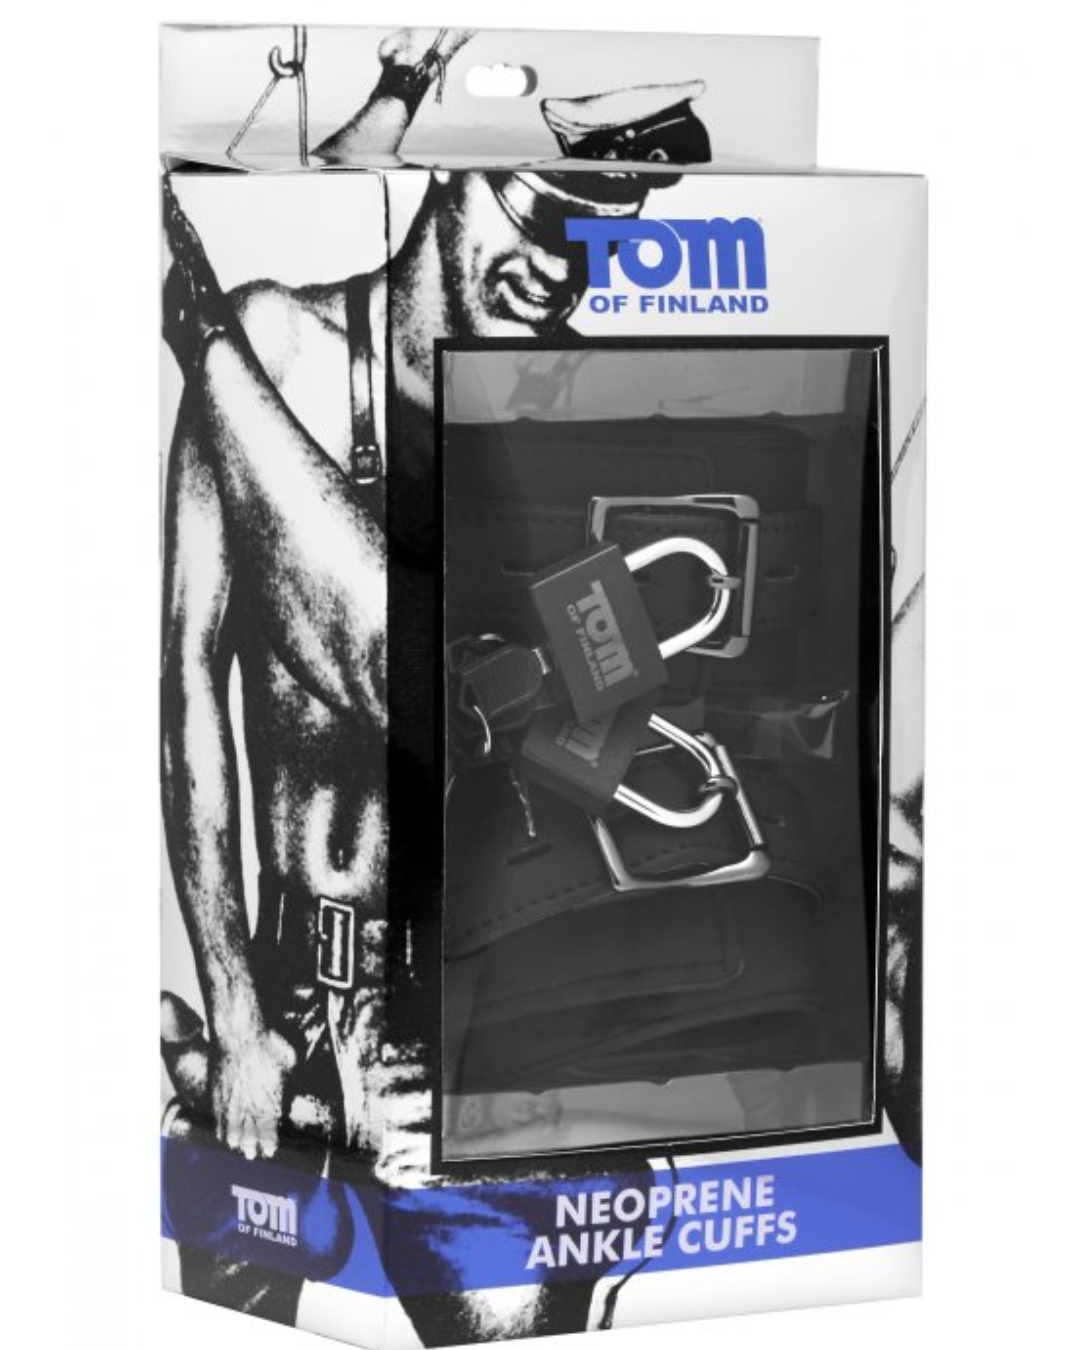 Tom of Finland Neoprene Ankle Cuffs with Locks package